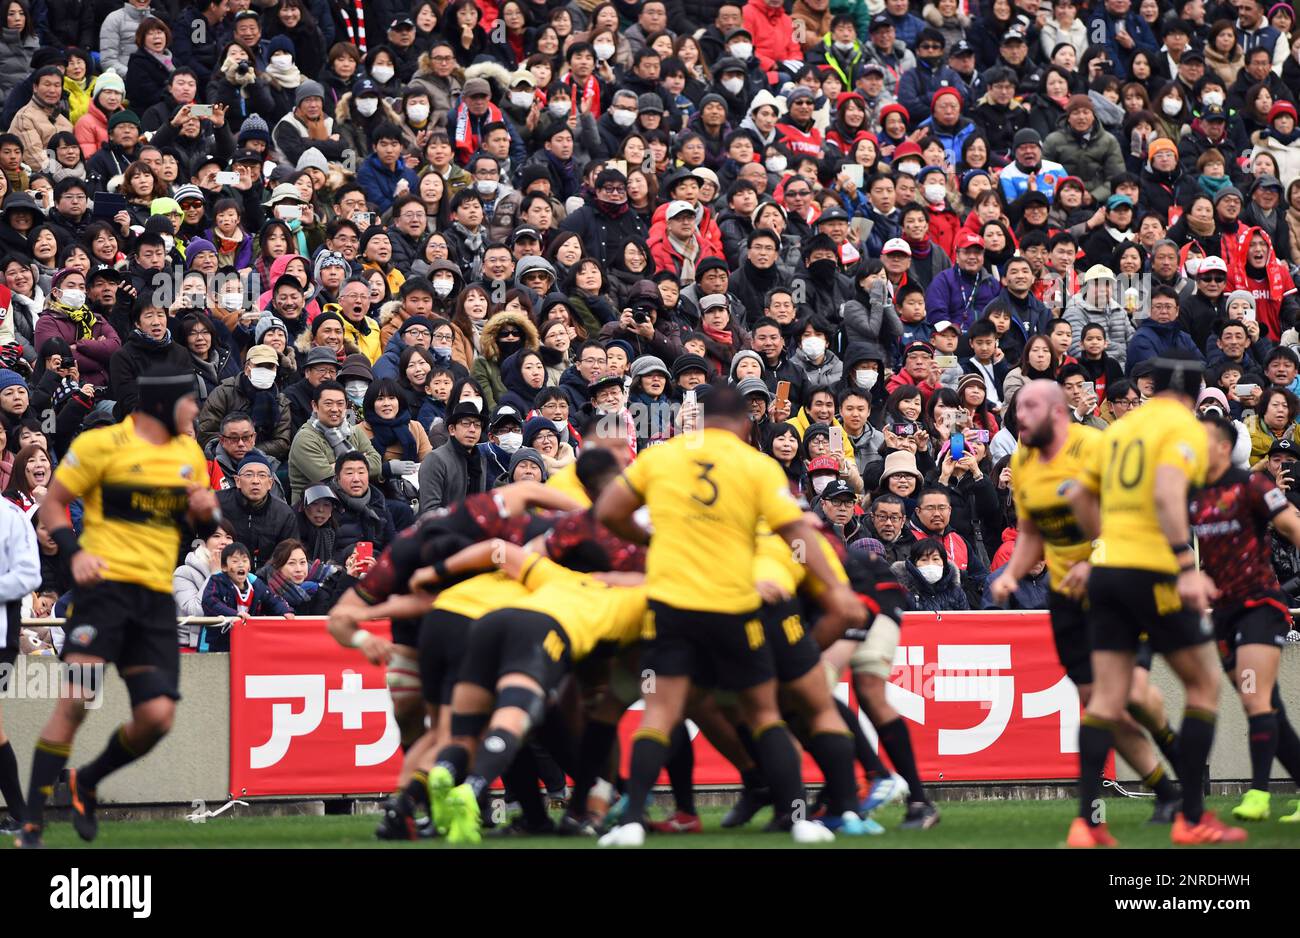 Lot of rugby fans gather to watch the Top League match between TOSHIBA Brave Lupus and Suntory Sungoliath at Chichibunomiya Rugby Stadium in Tokyo on January 12, 2020